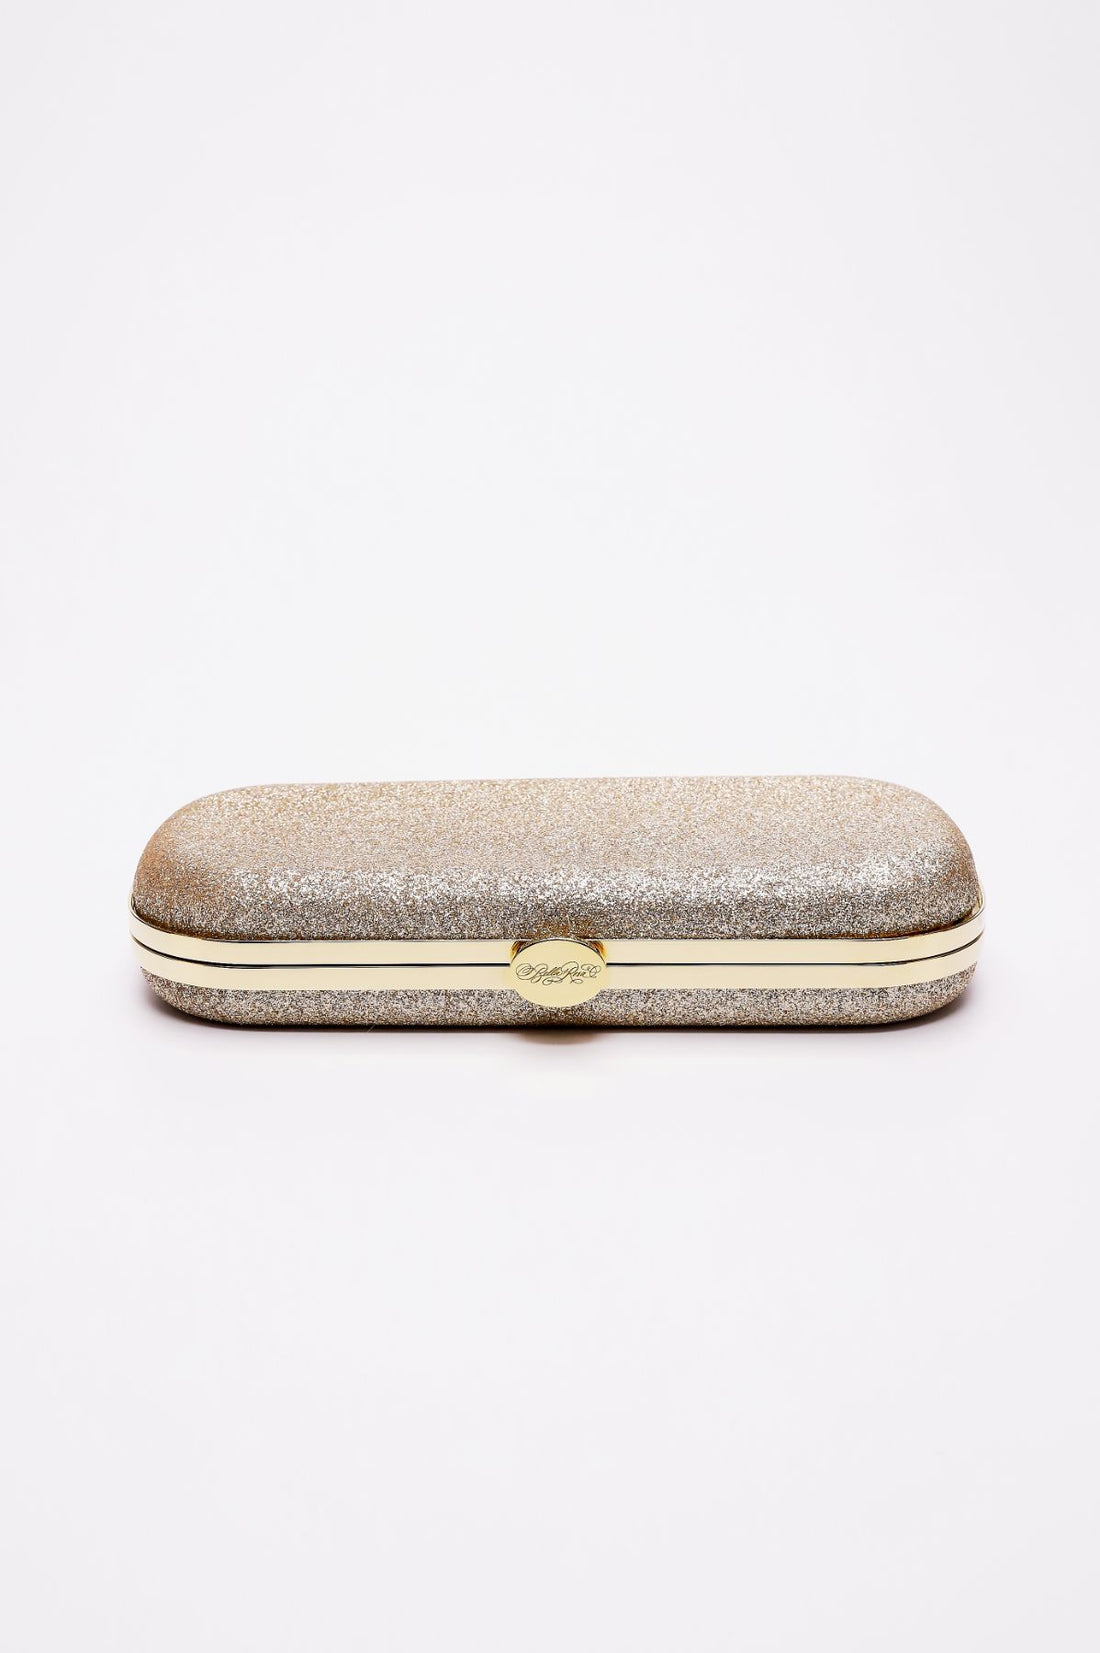 Top closed view of Bella Clutch in Champagne shimmer with gold hardware frame.